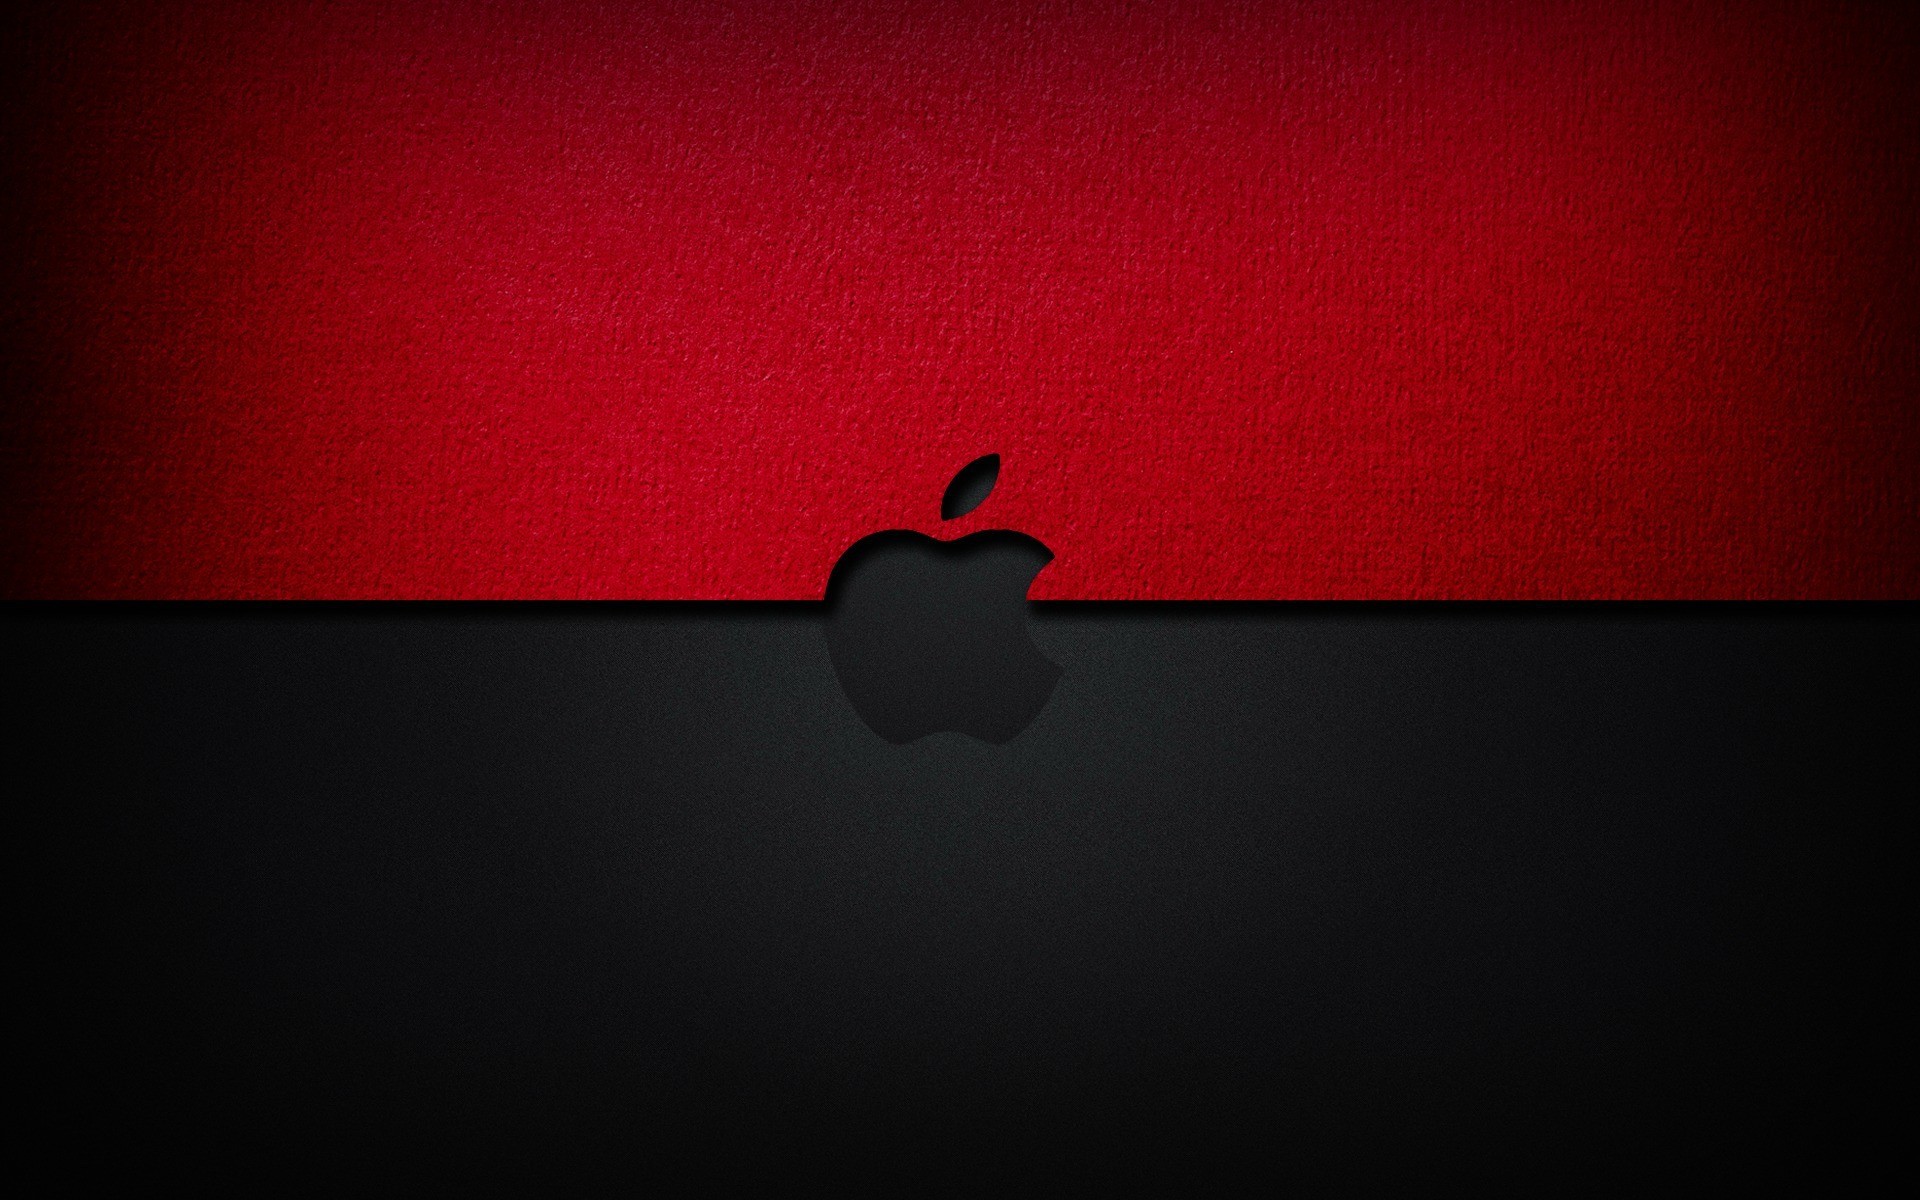 cool apple wallpapers red